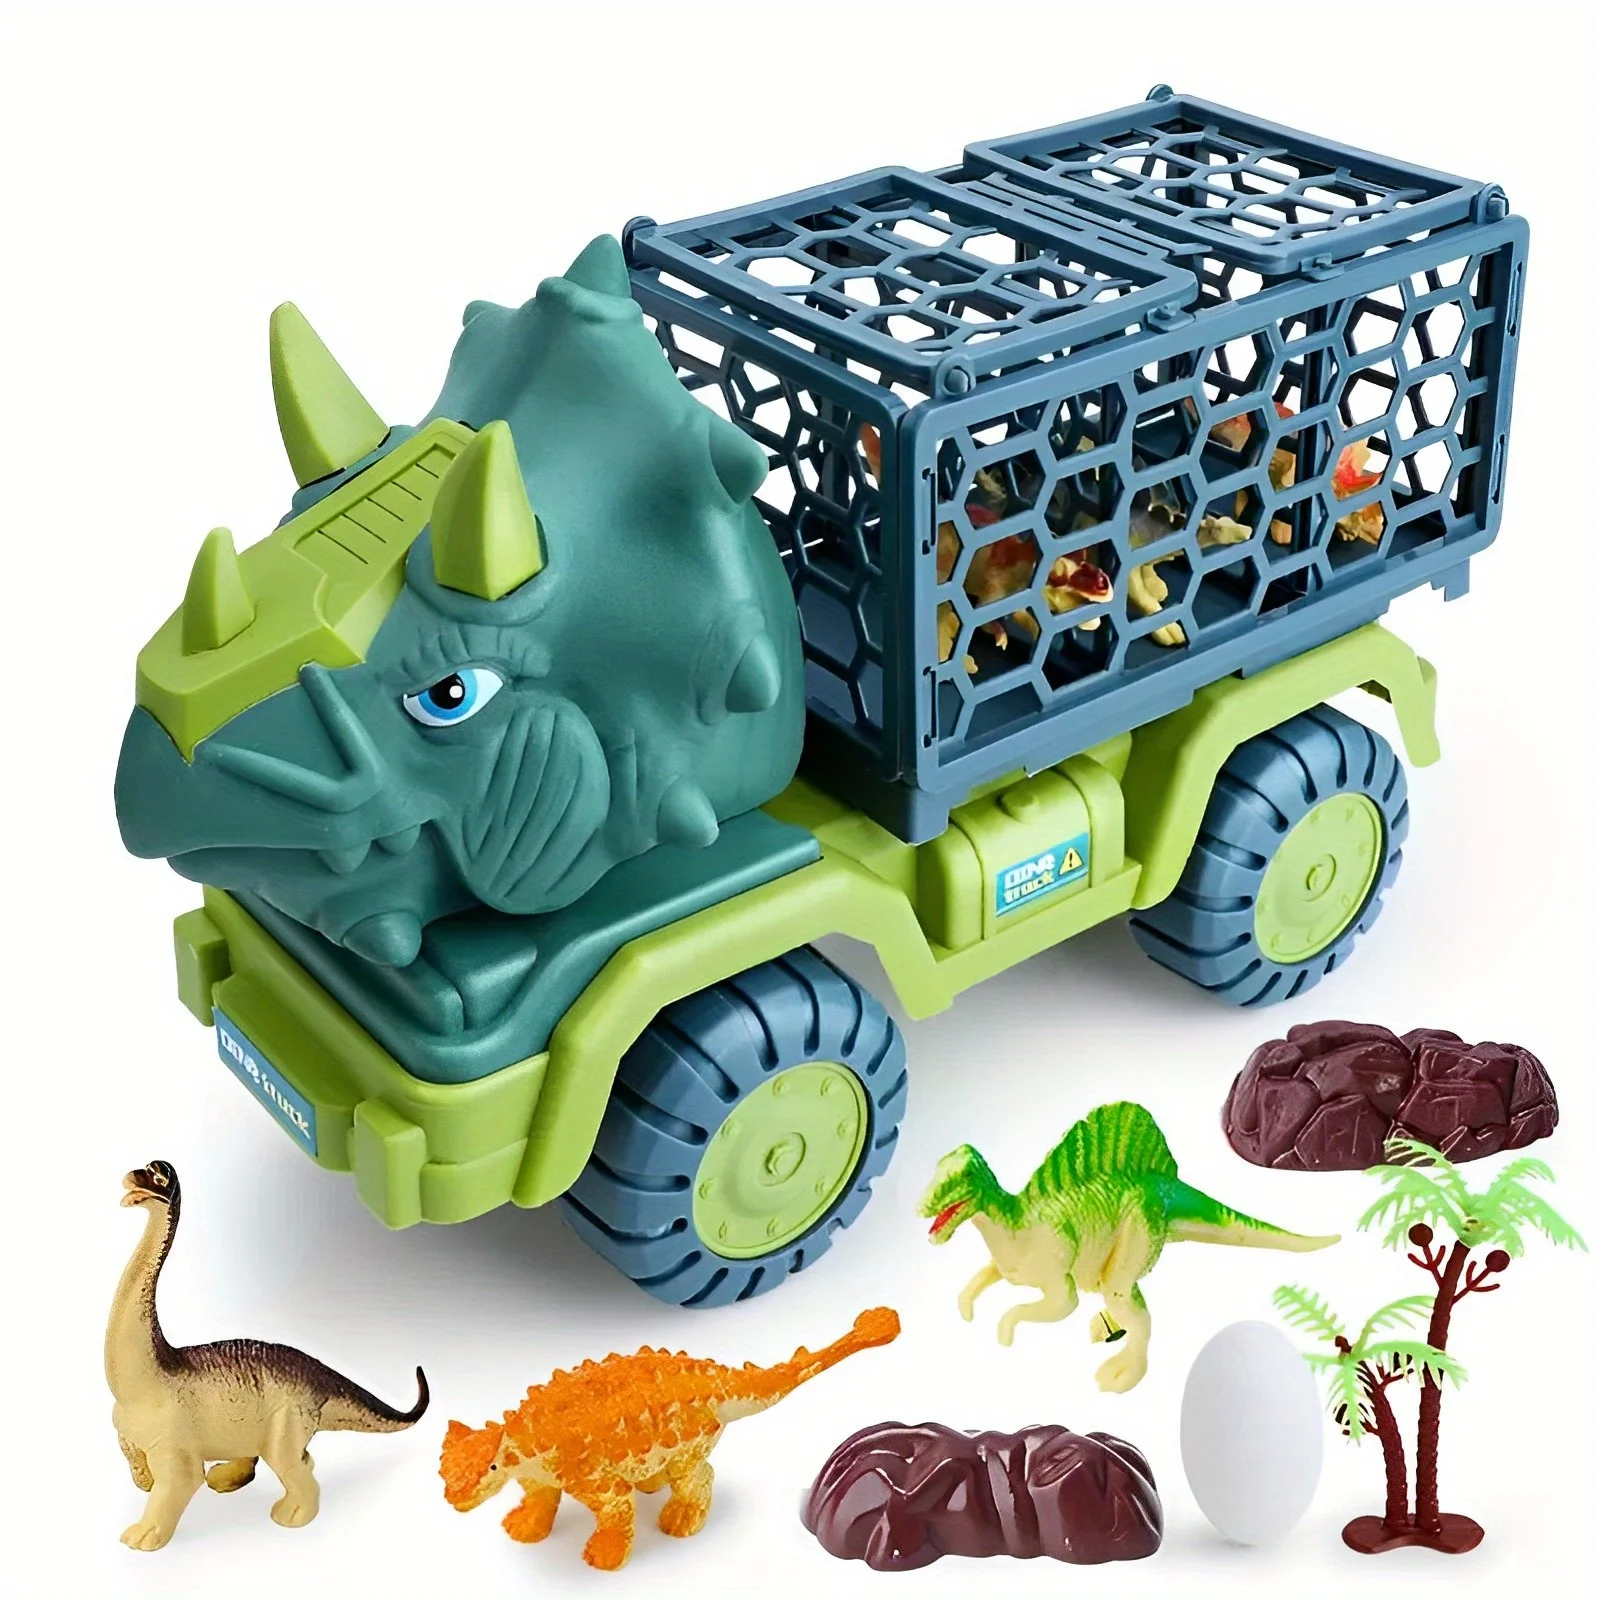 Children Dinosaur Transport Car Toy Oversized Inertial Cars Carrier Truck Toy Pull Back Vehicle with Dinosaur Gift for Kids Boy oversize inertial dinosaur car engineering vehicle excavator fall resistant pull back vehicle with dinosaur kids truck toy gift